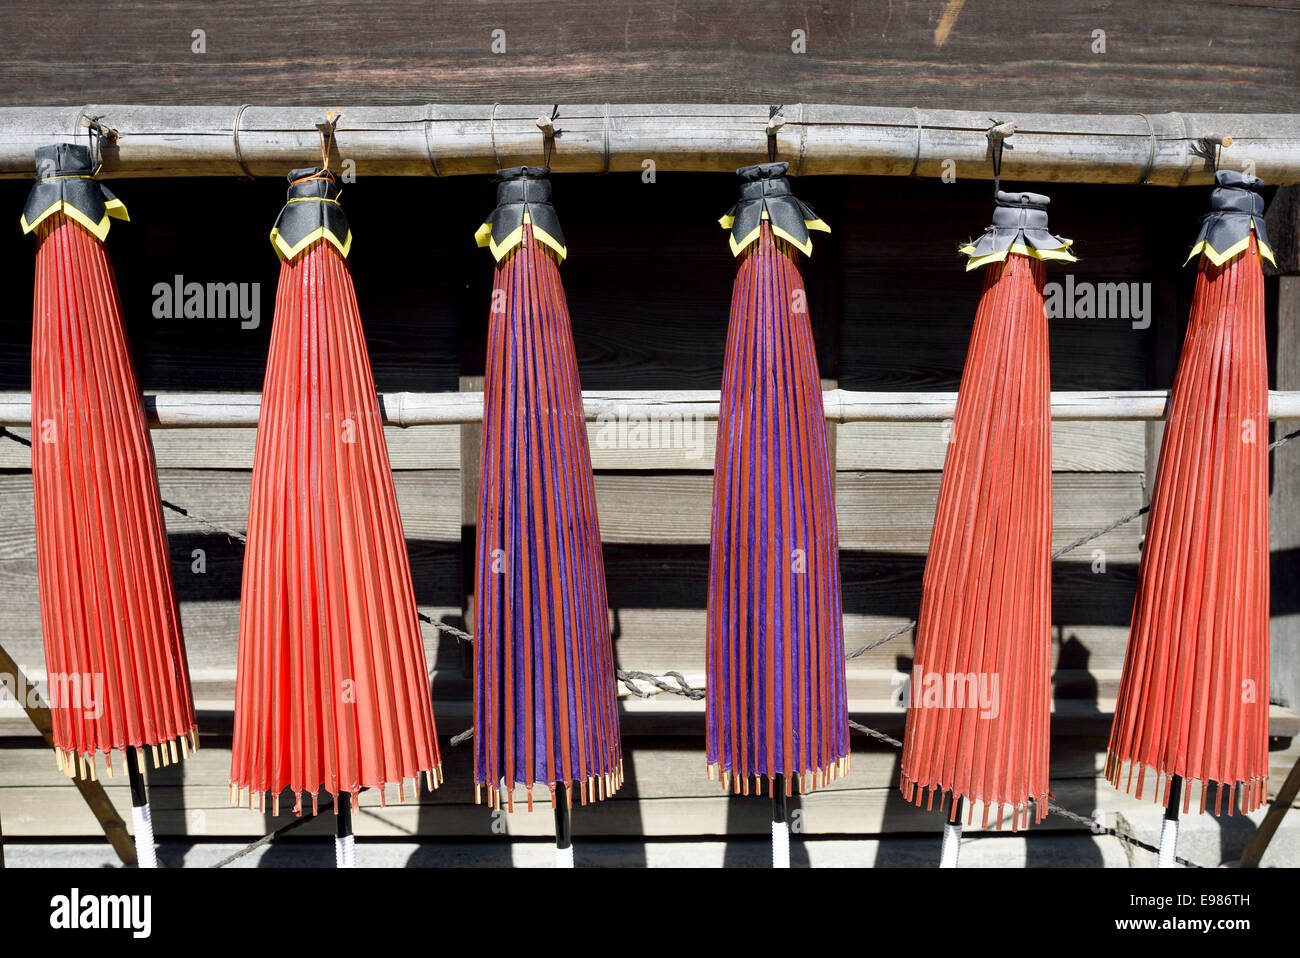 Closed Japanese traditional red umbrella Stock Photo - Alamy